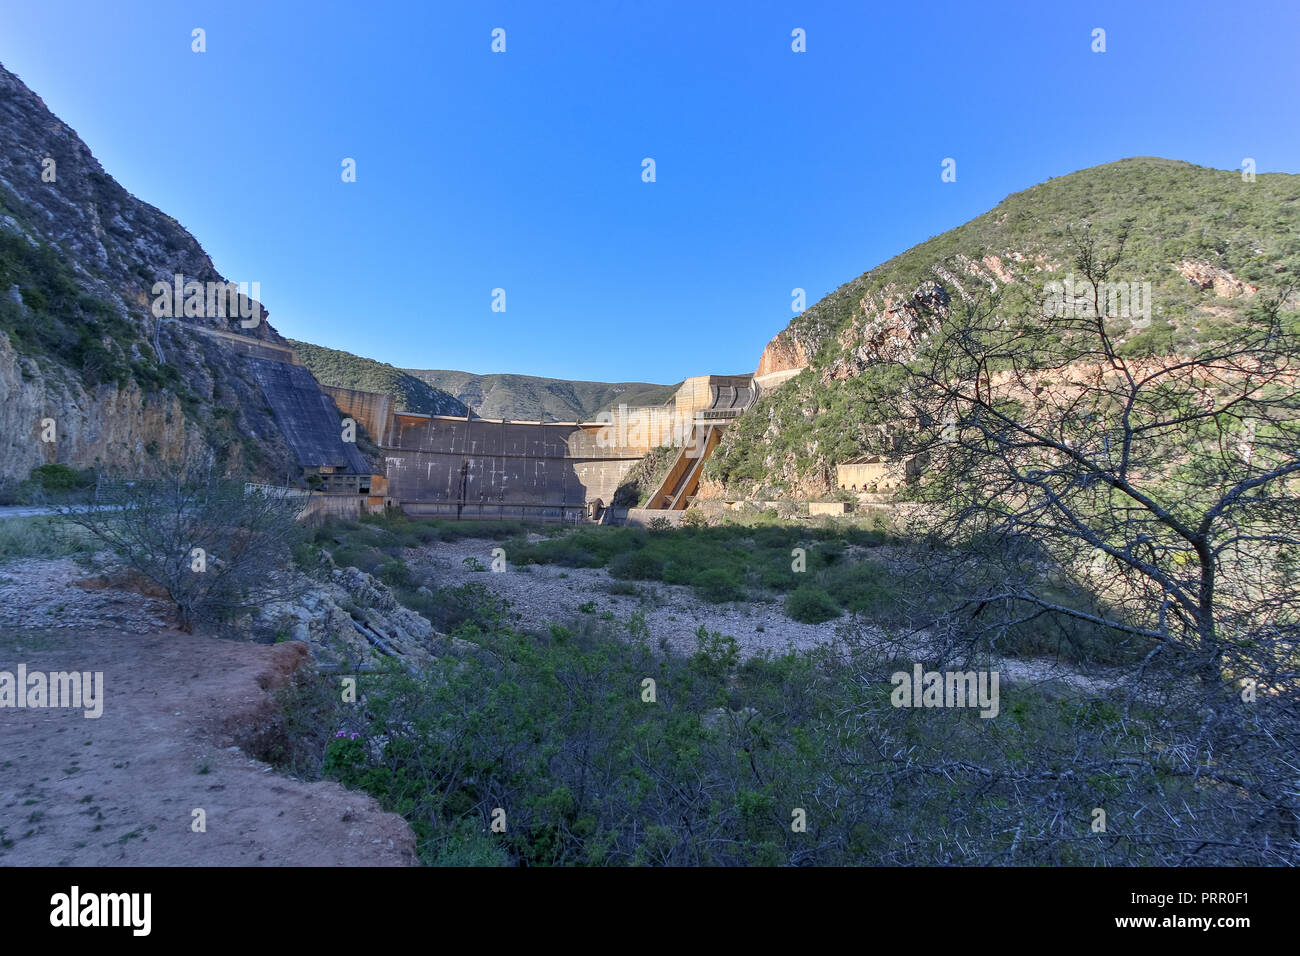 The full view of the dam wall without water flowing over it Stock Photo